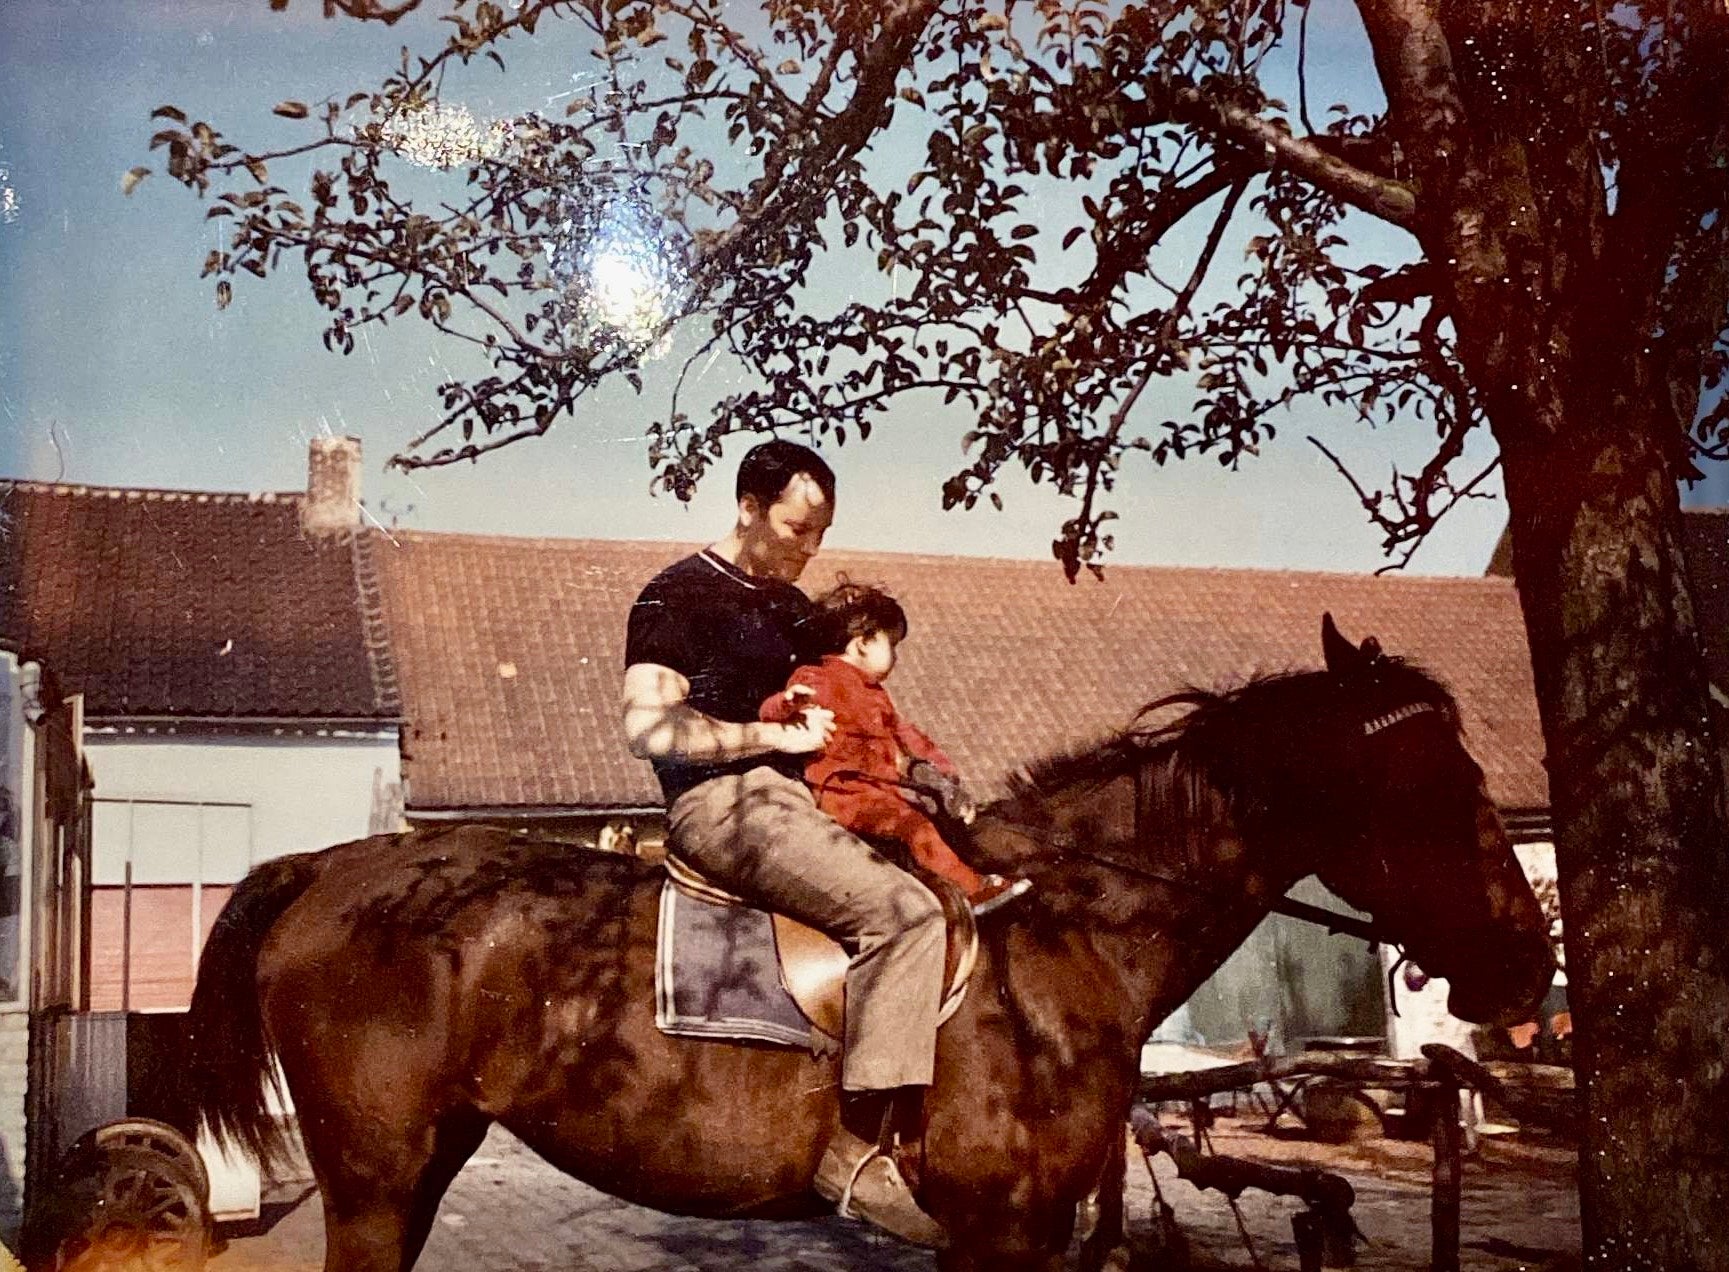 Graydon and her dad on a horse when she was a child